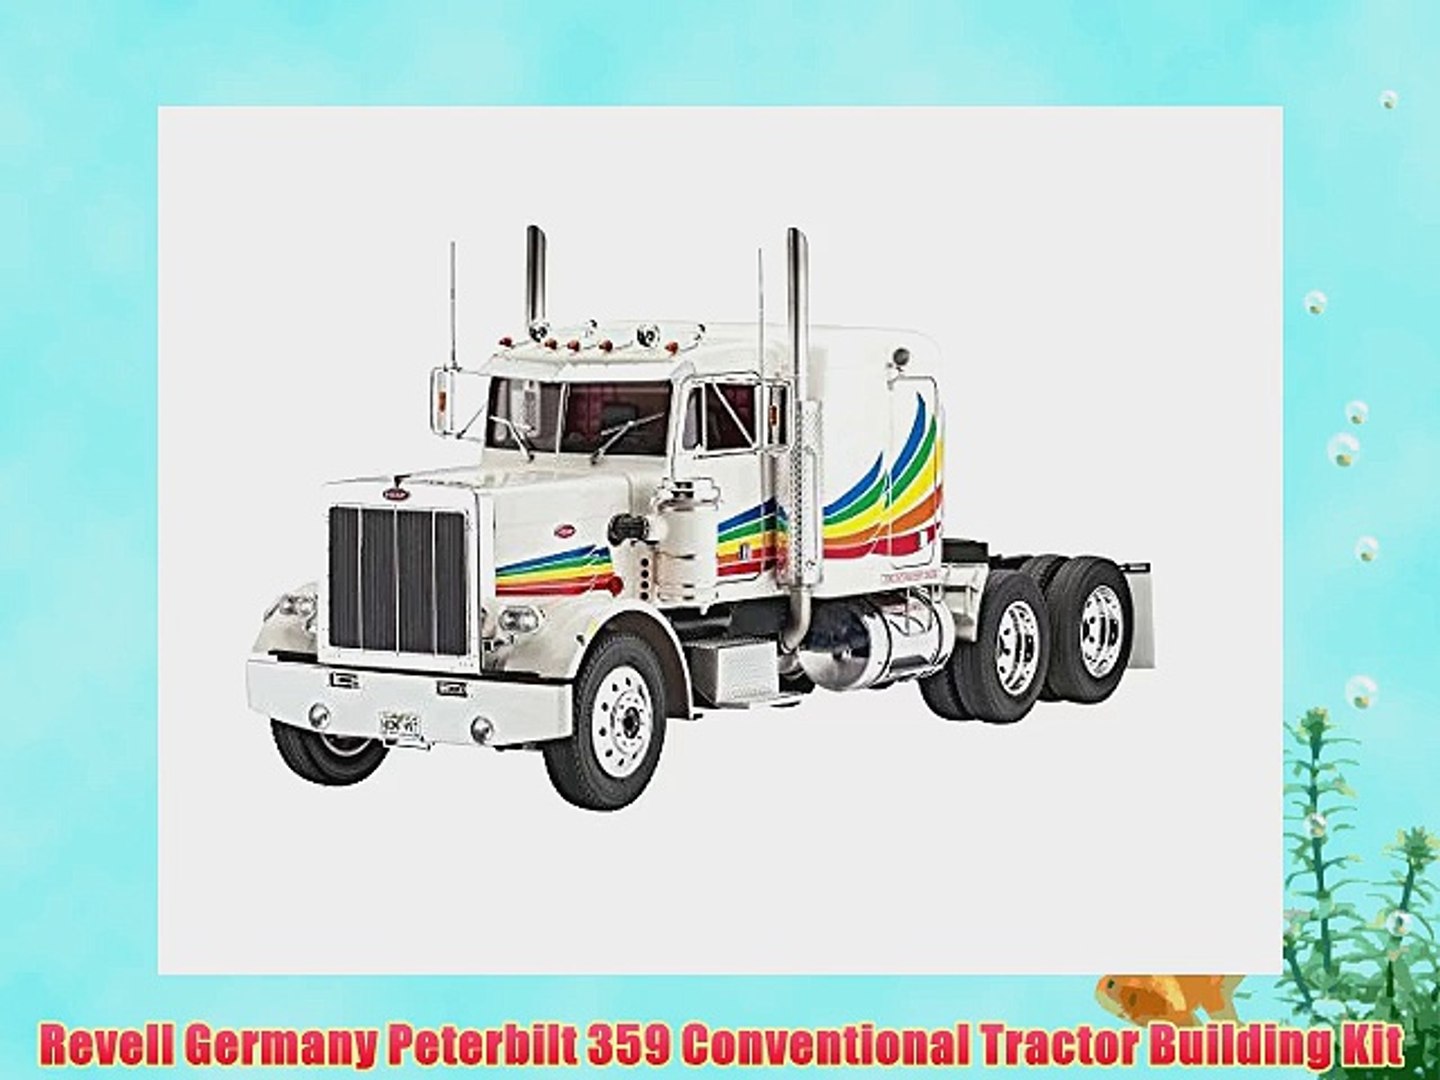 Revell Germany Peterbilt 359 Conventional Tractor Building